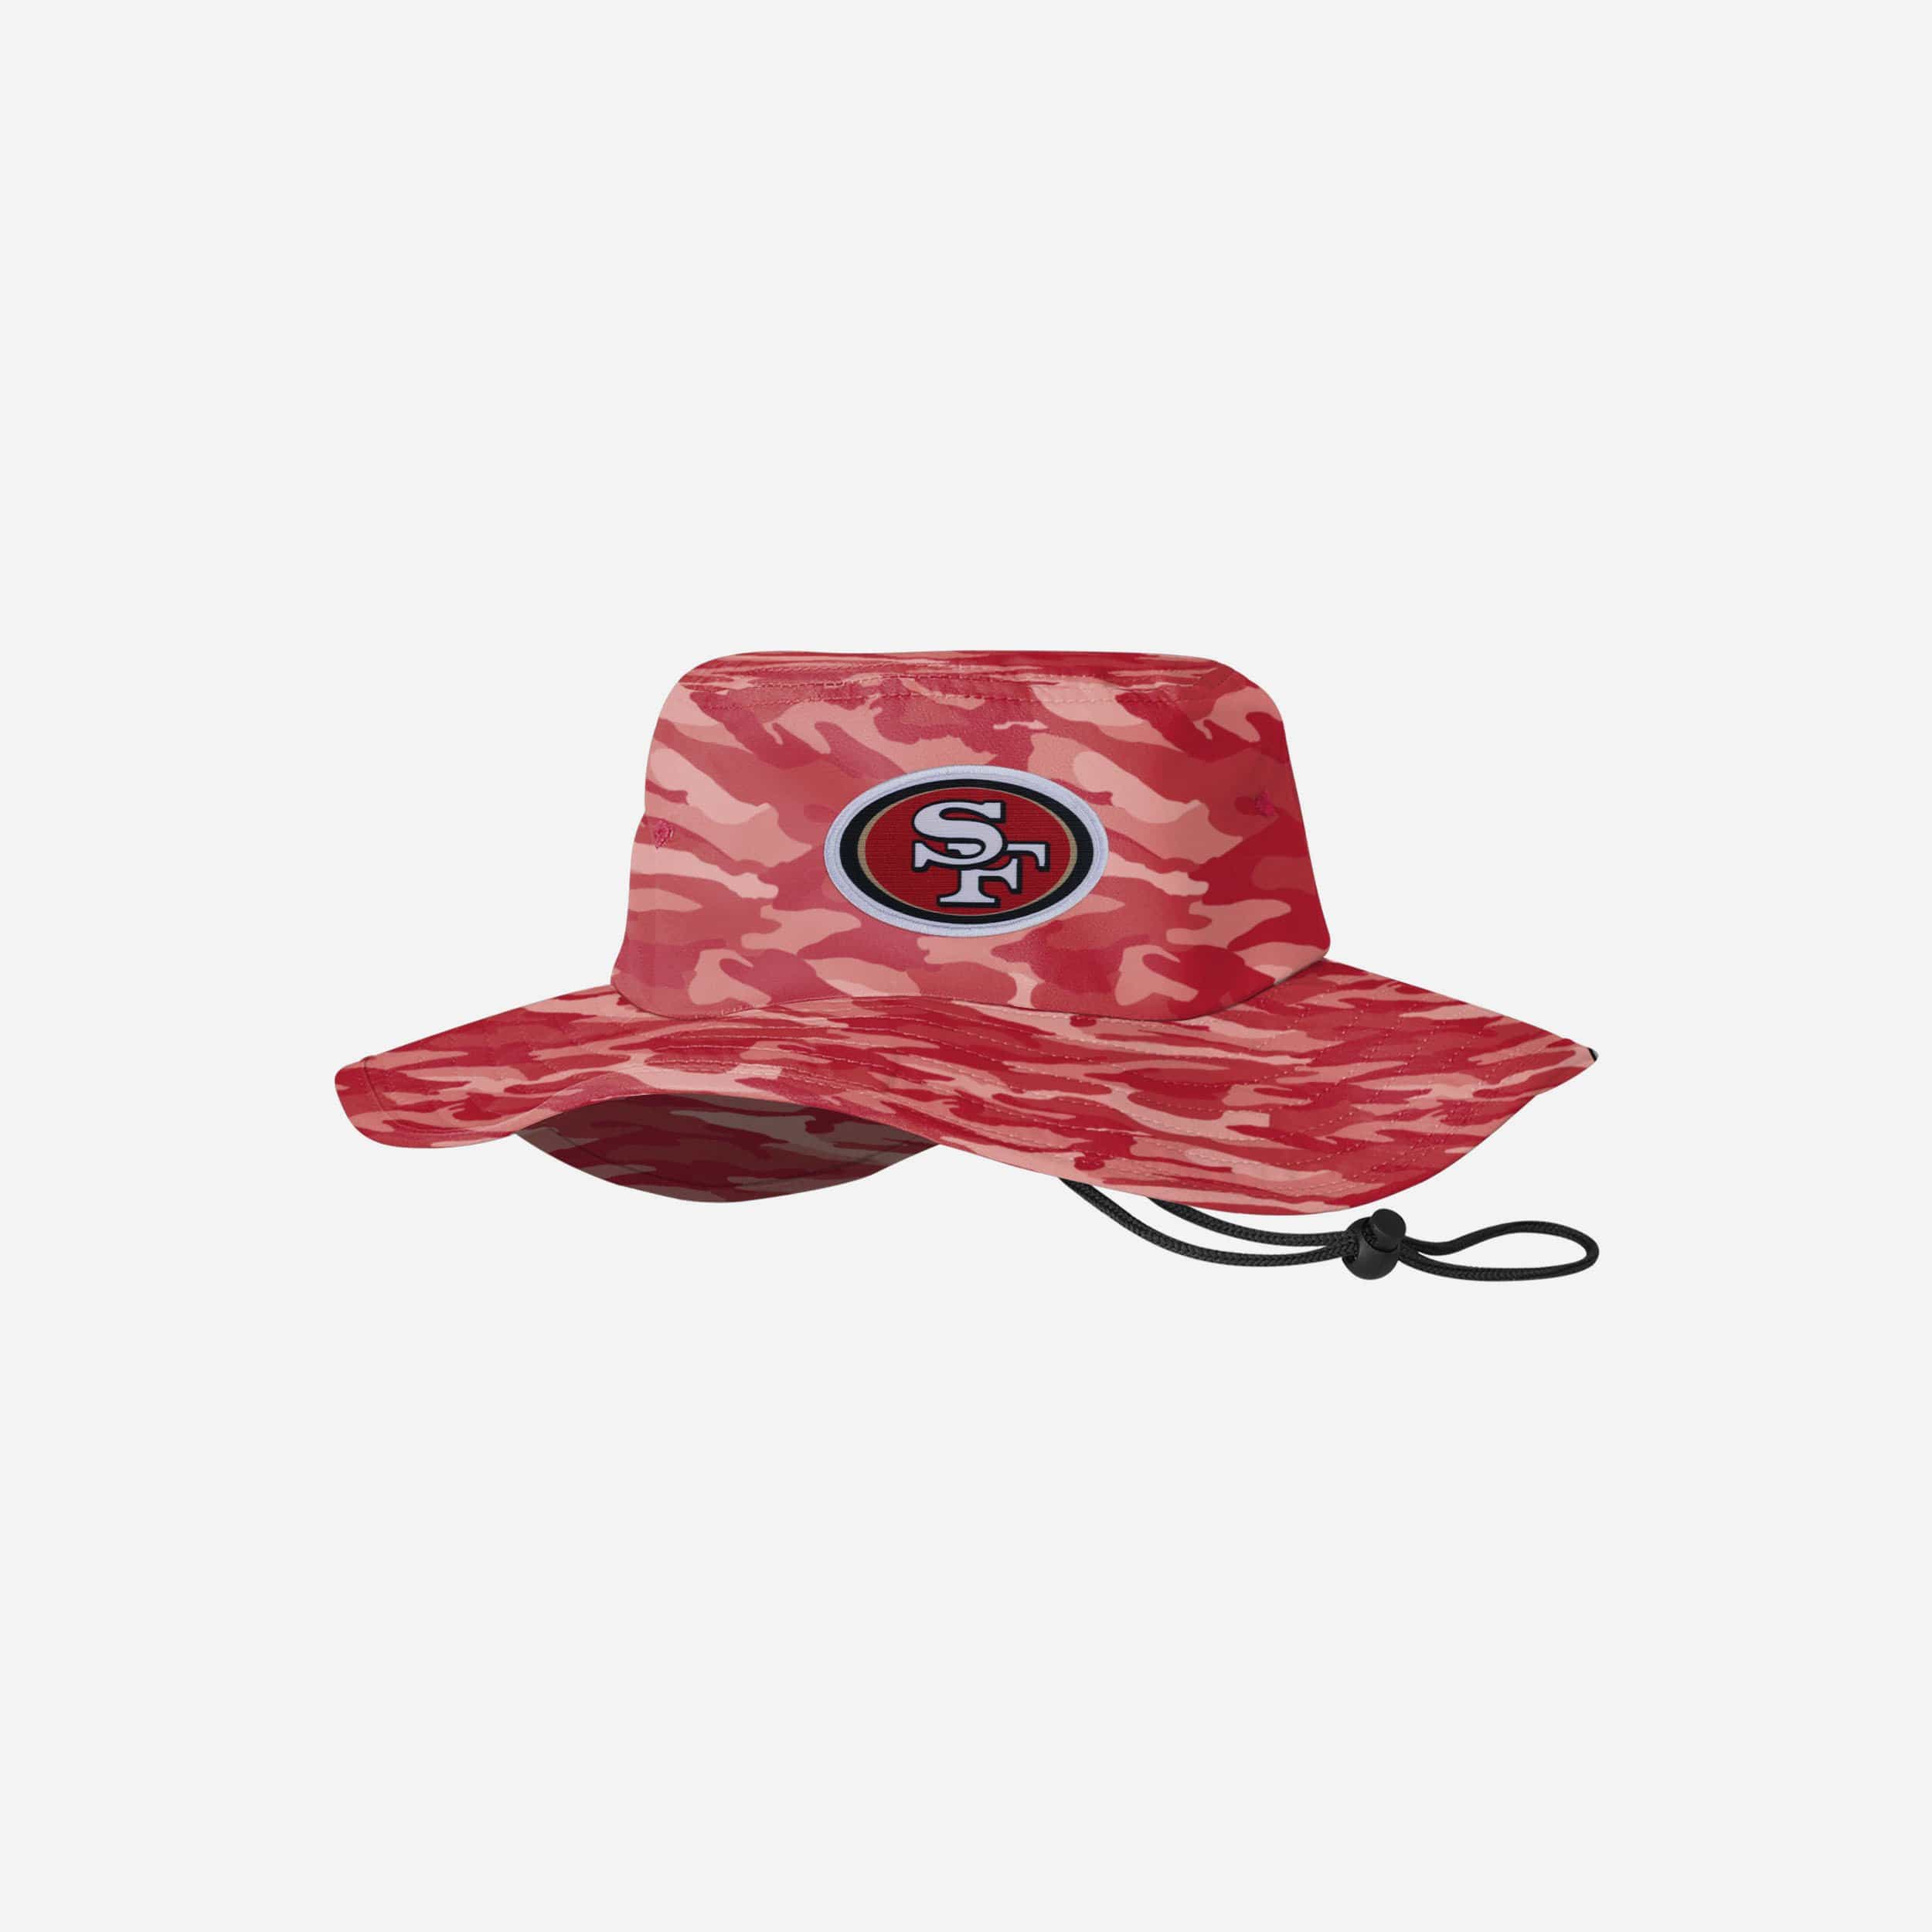 San Francisco 49ers Buckethat for Sale in Salinas, CA - OfferUp